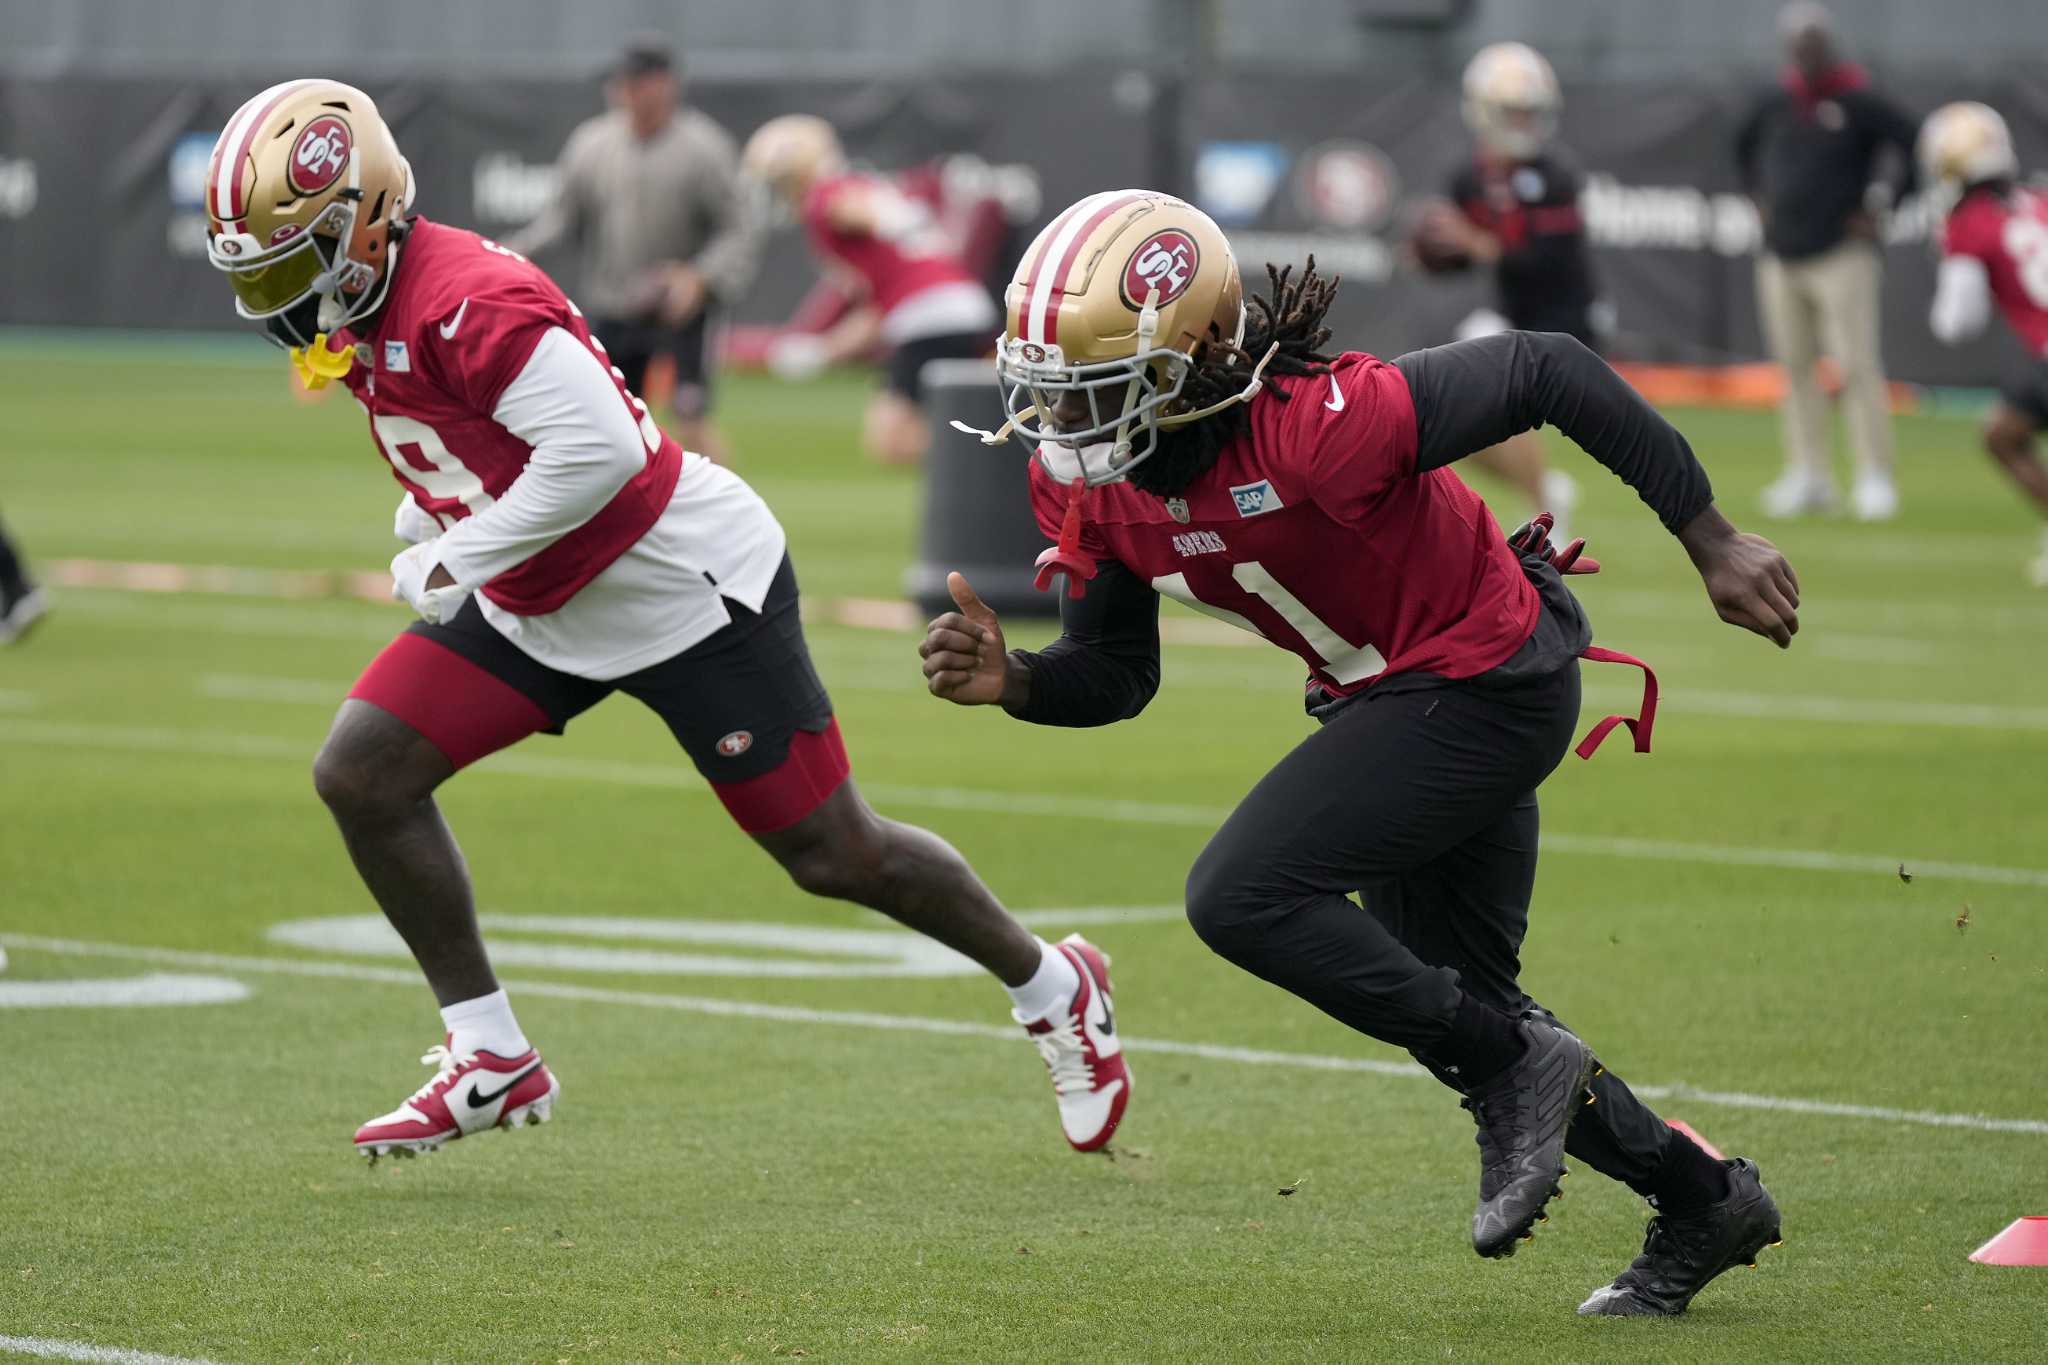 49ers' rookie WR Brandon Aiyuk looks experienced in blowout of Giants